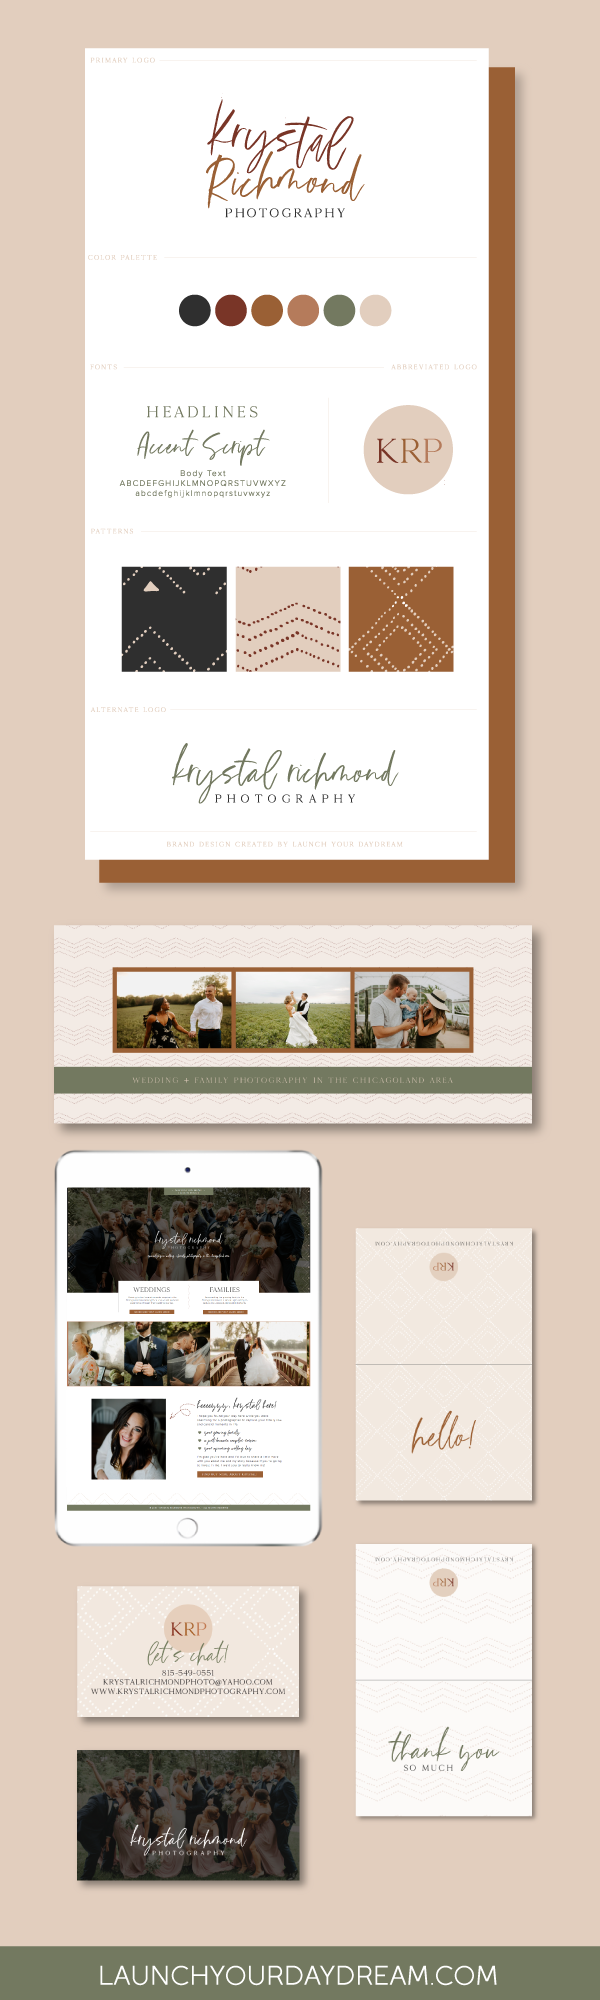 This is a warm and boho chic brand design portfolio and Showit web design for Krystal Richmond Photography